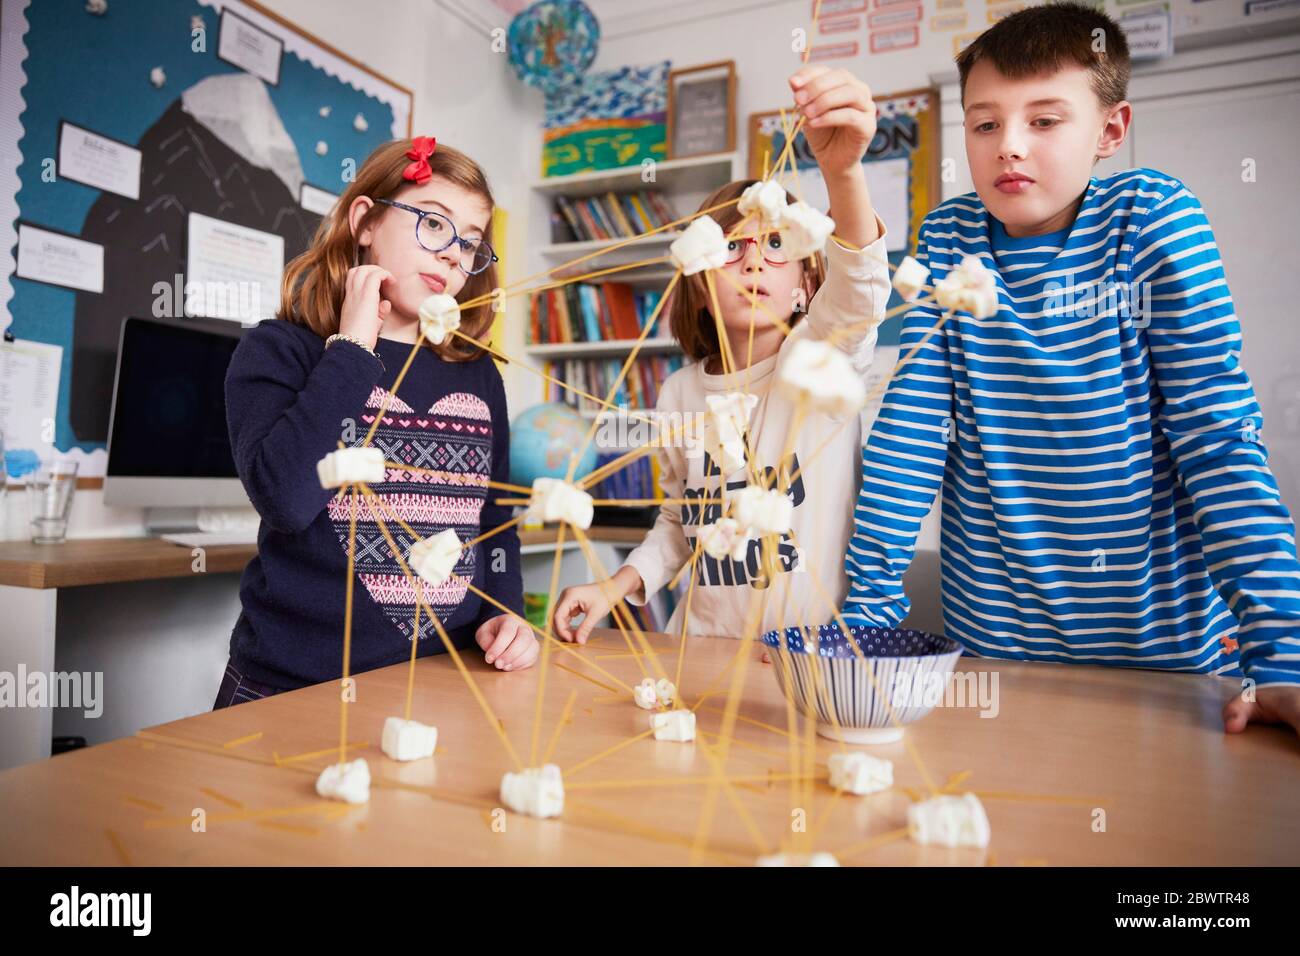 Three children setting up construction during a science lesson Stock Photo